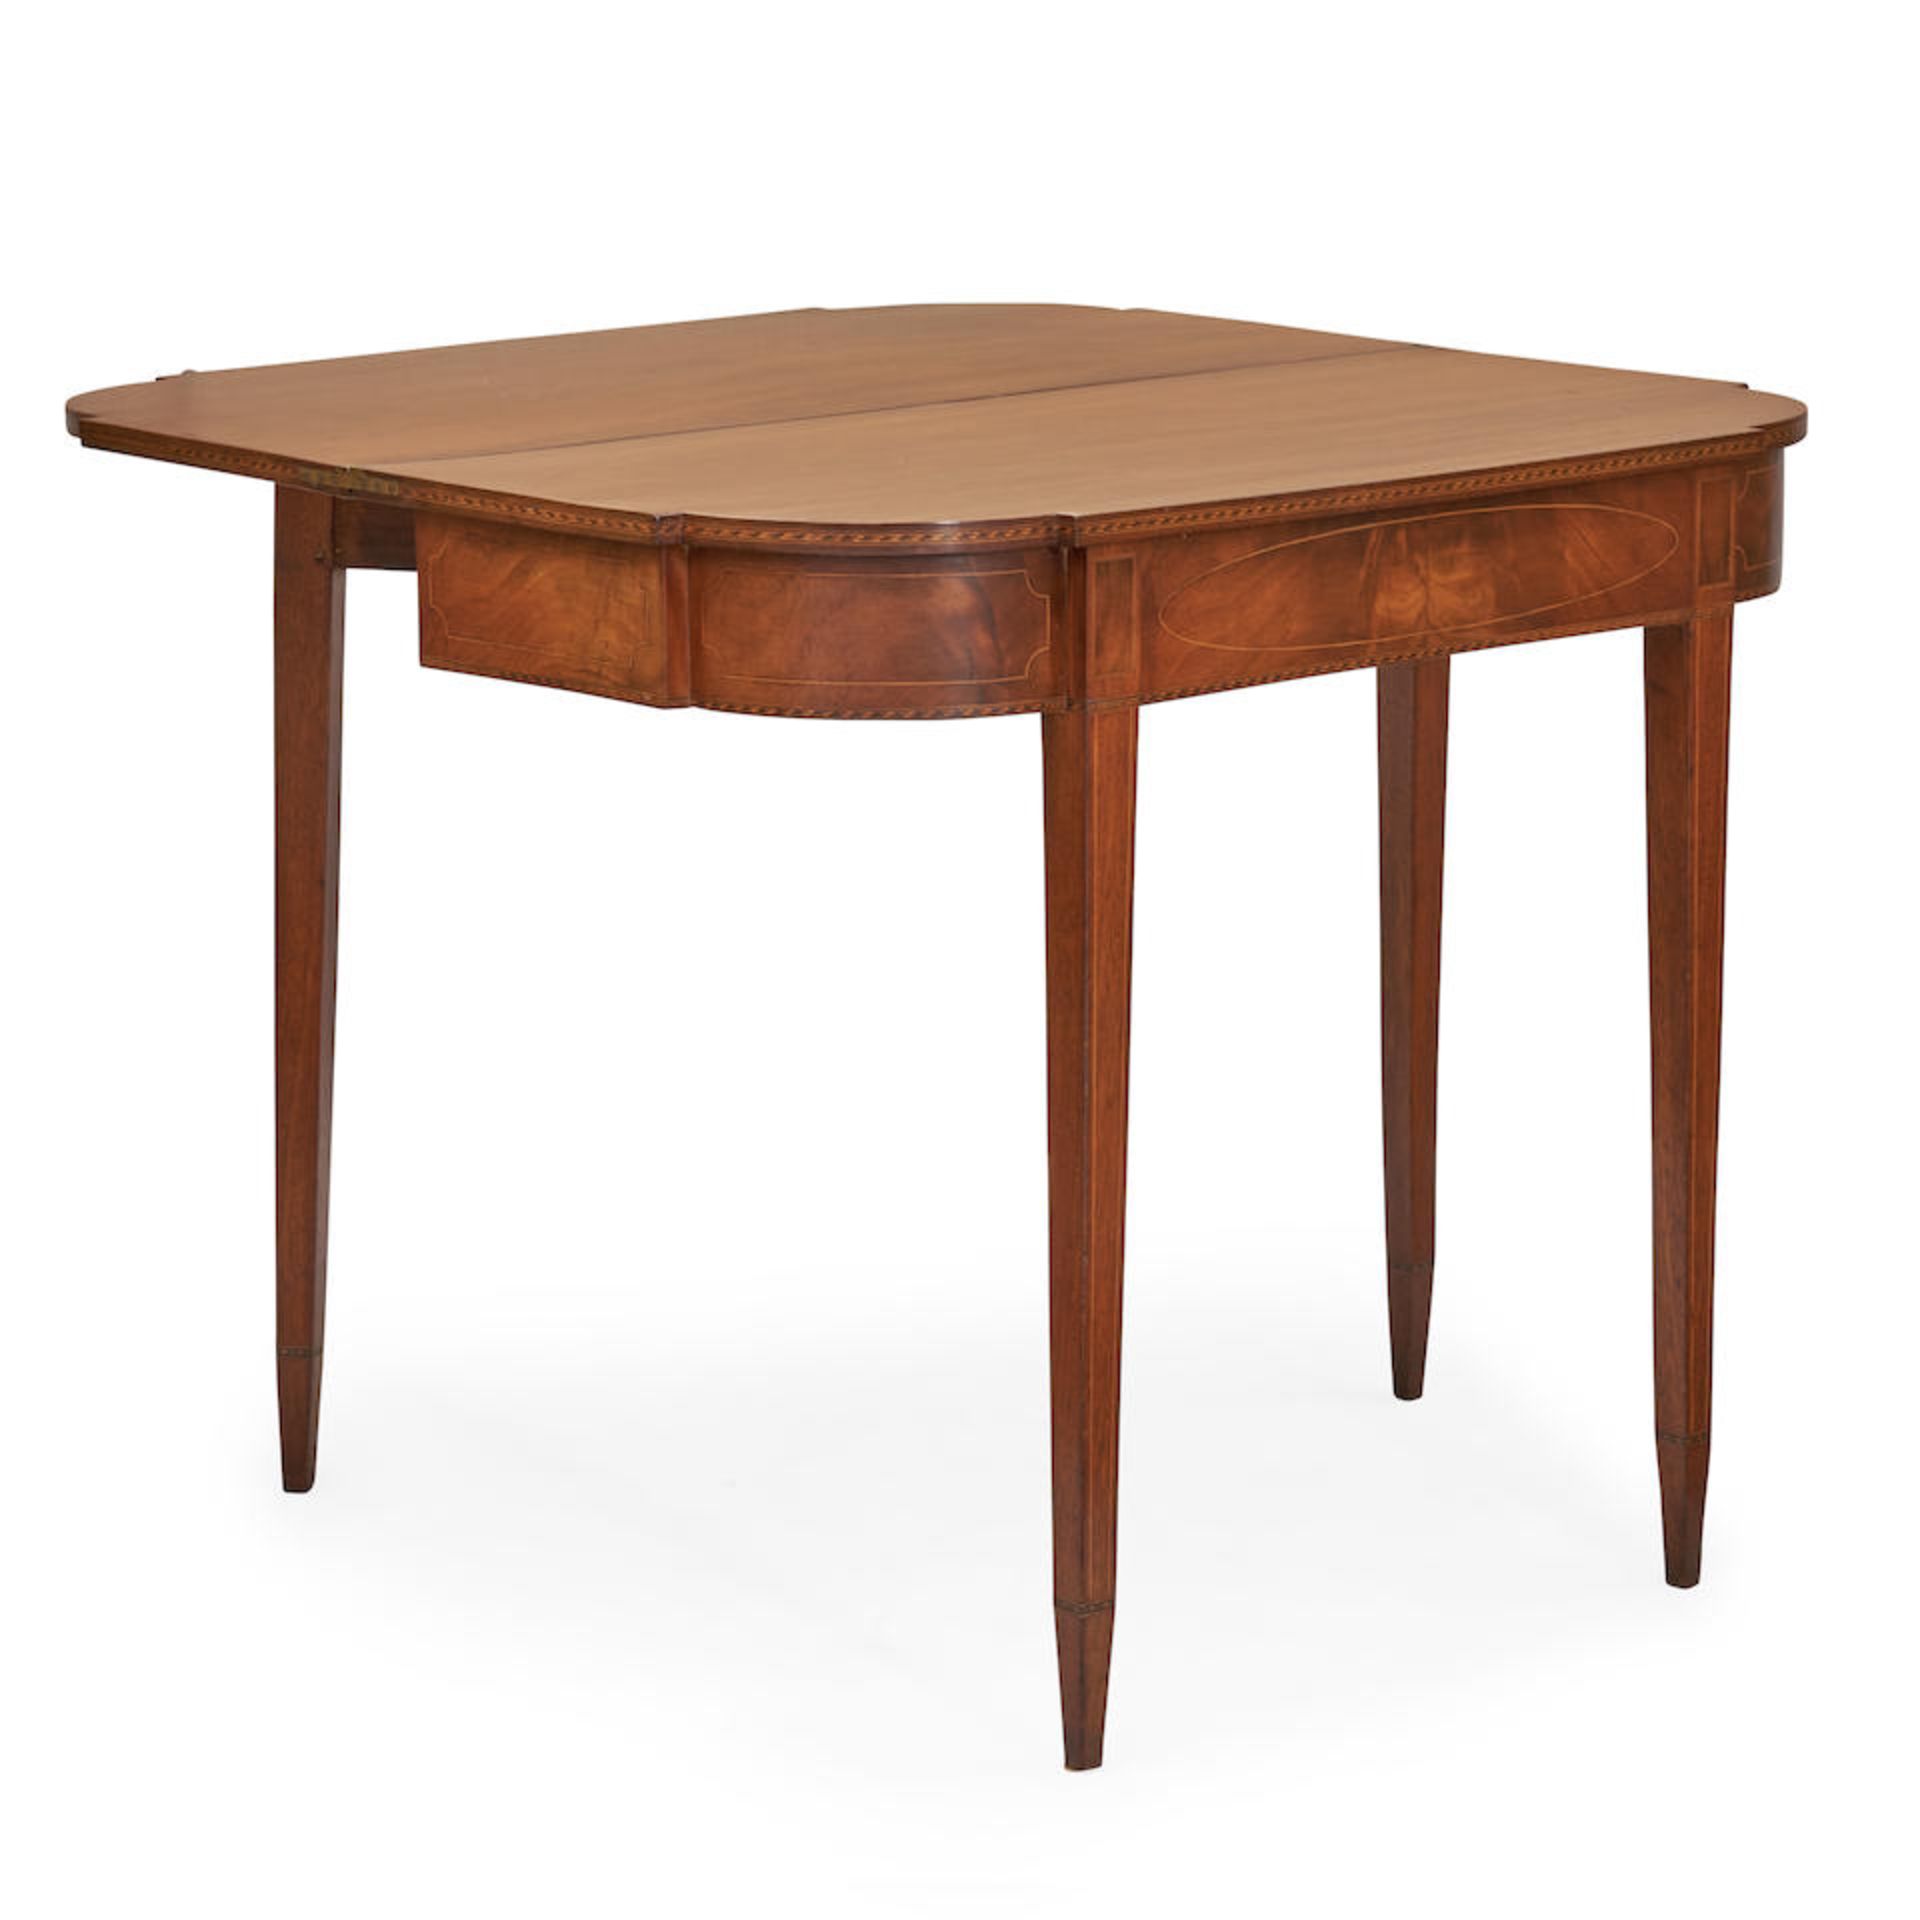 Federal Satinwood-inlaid Mahogany Card Table, New England, c. 1800. - Image 3 of 3